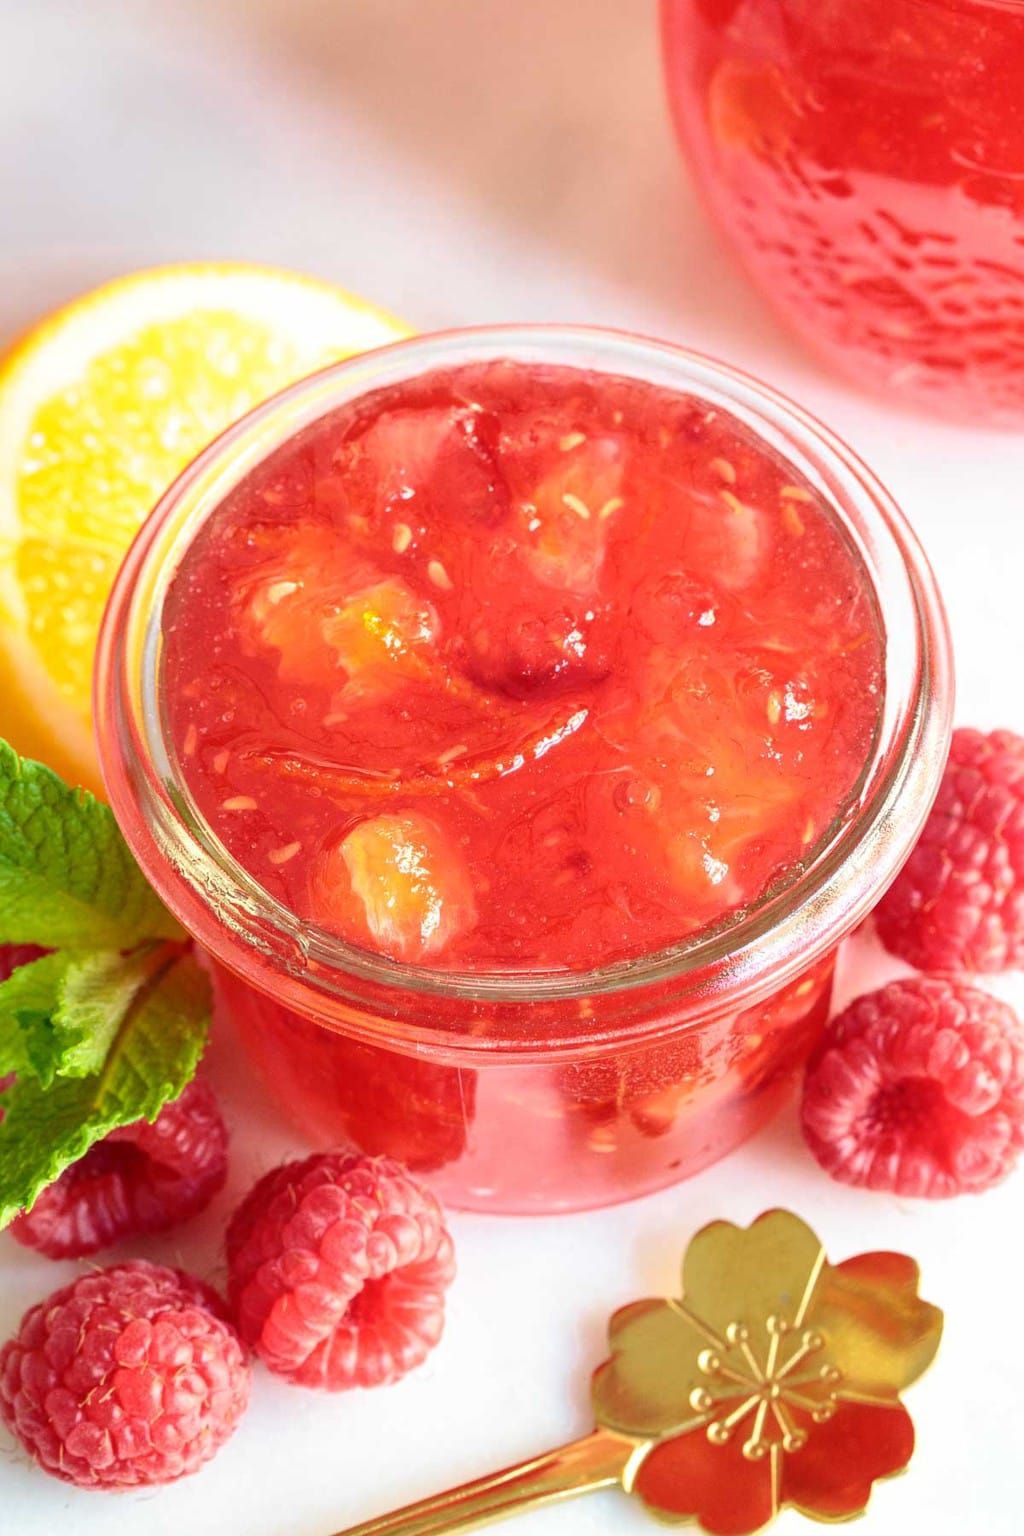 Vertical extreme closeup photo of a glass jar of Raspberry Meyer Lemon Marmalade surrounded by fresh raspberries and lemons.